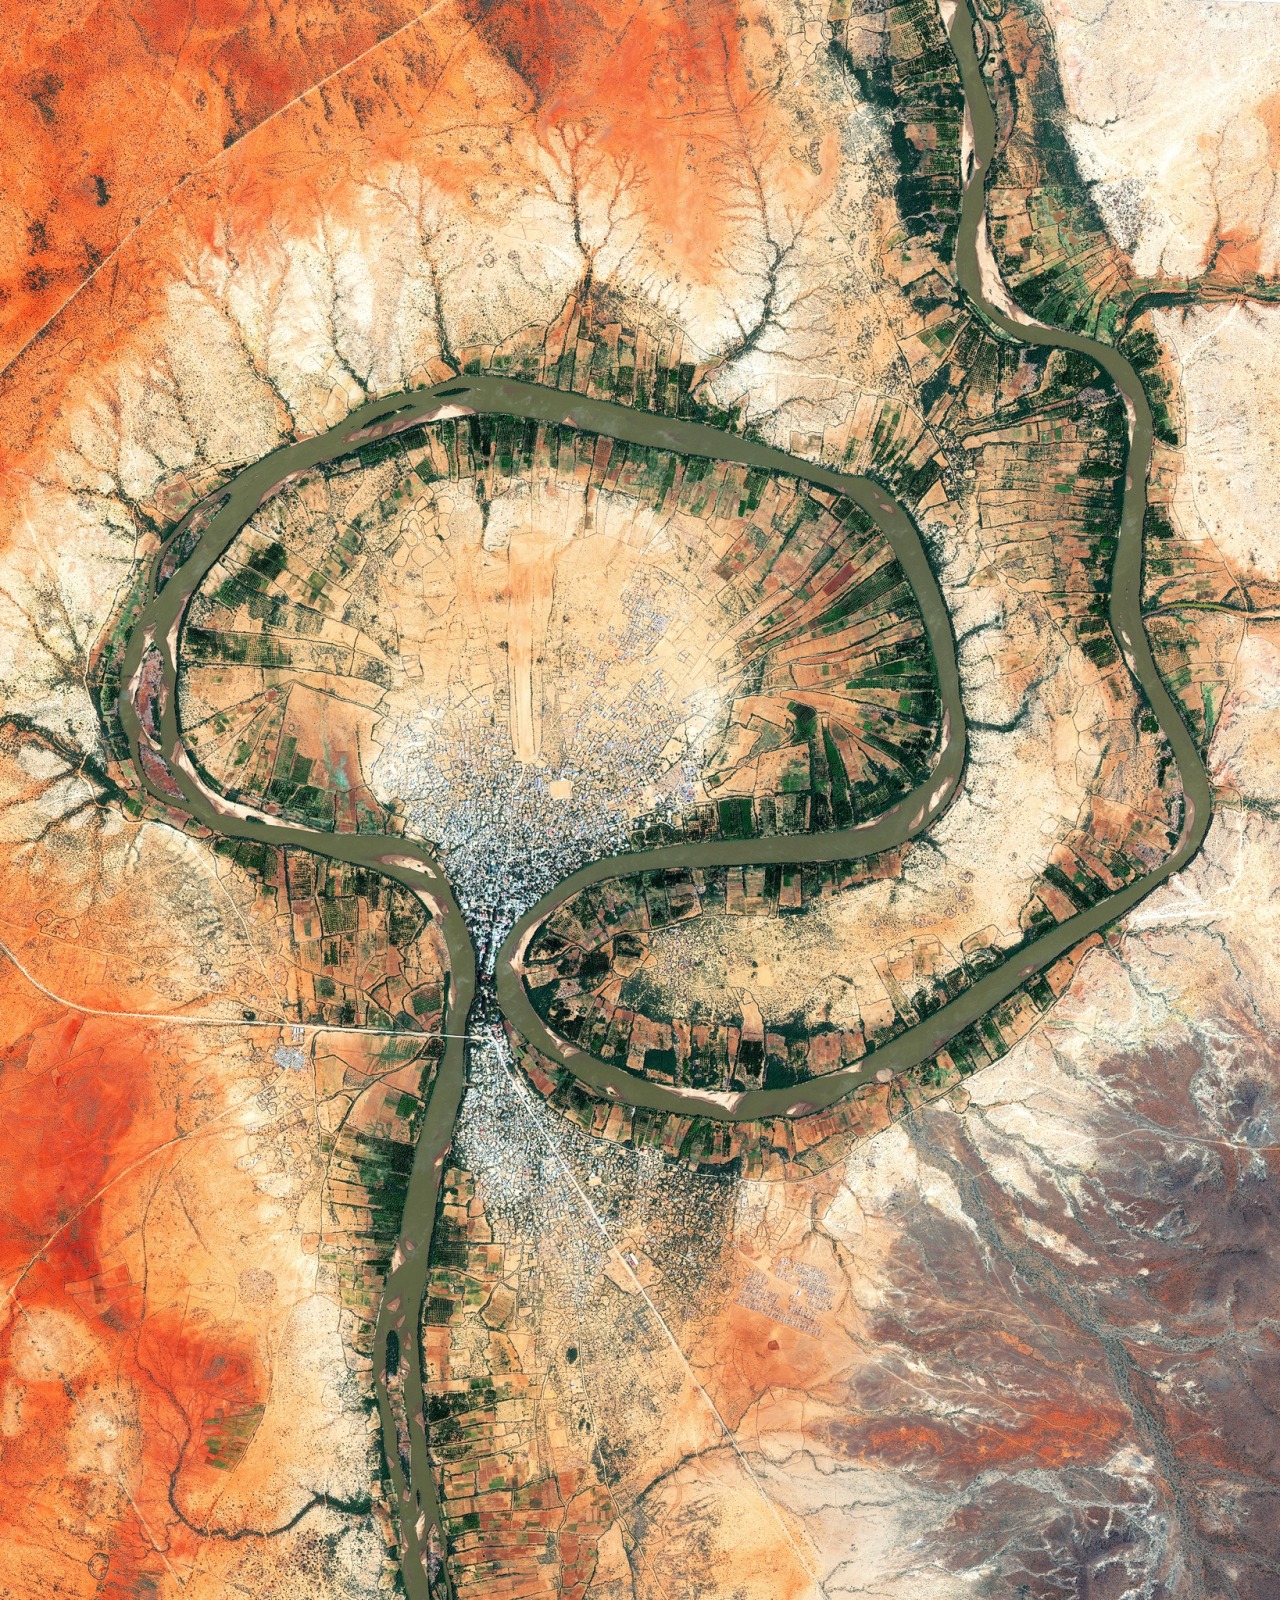 dailyoverview:Luuq, Somalia, is located in a horseshoe-shaped bend of the Jubba River. The town’s geographic position has had a great influence on its history and development, helping it to become one of Somalia’s larger inland market towns as early